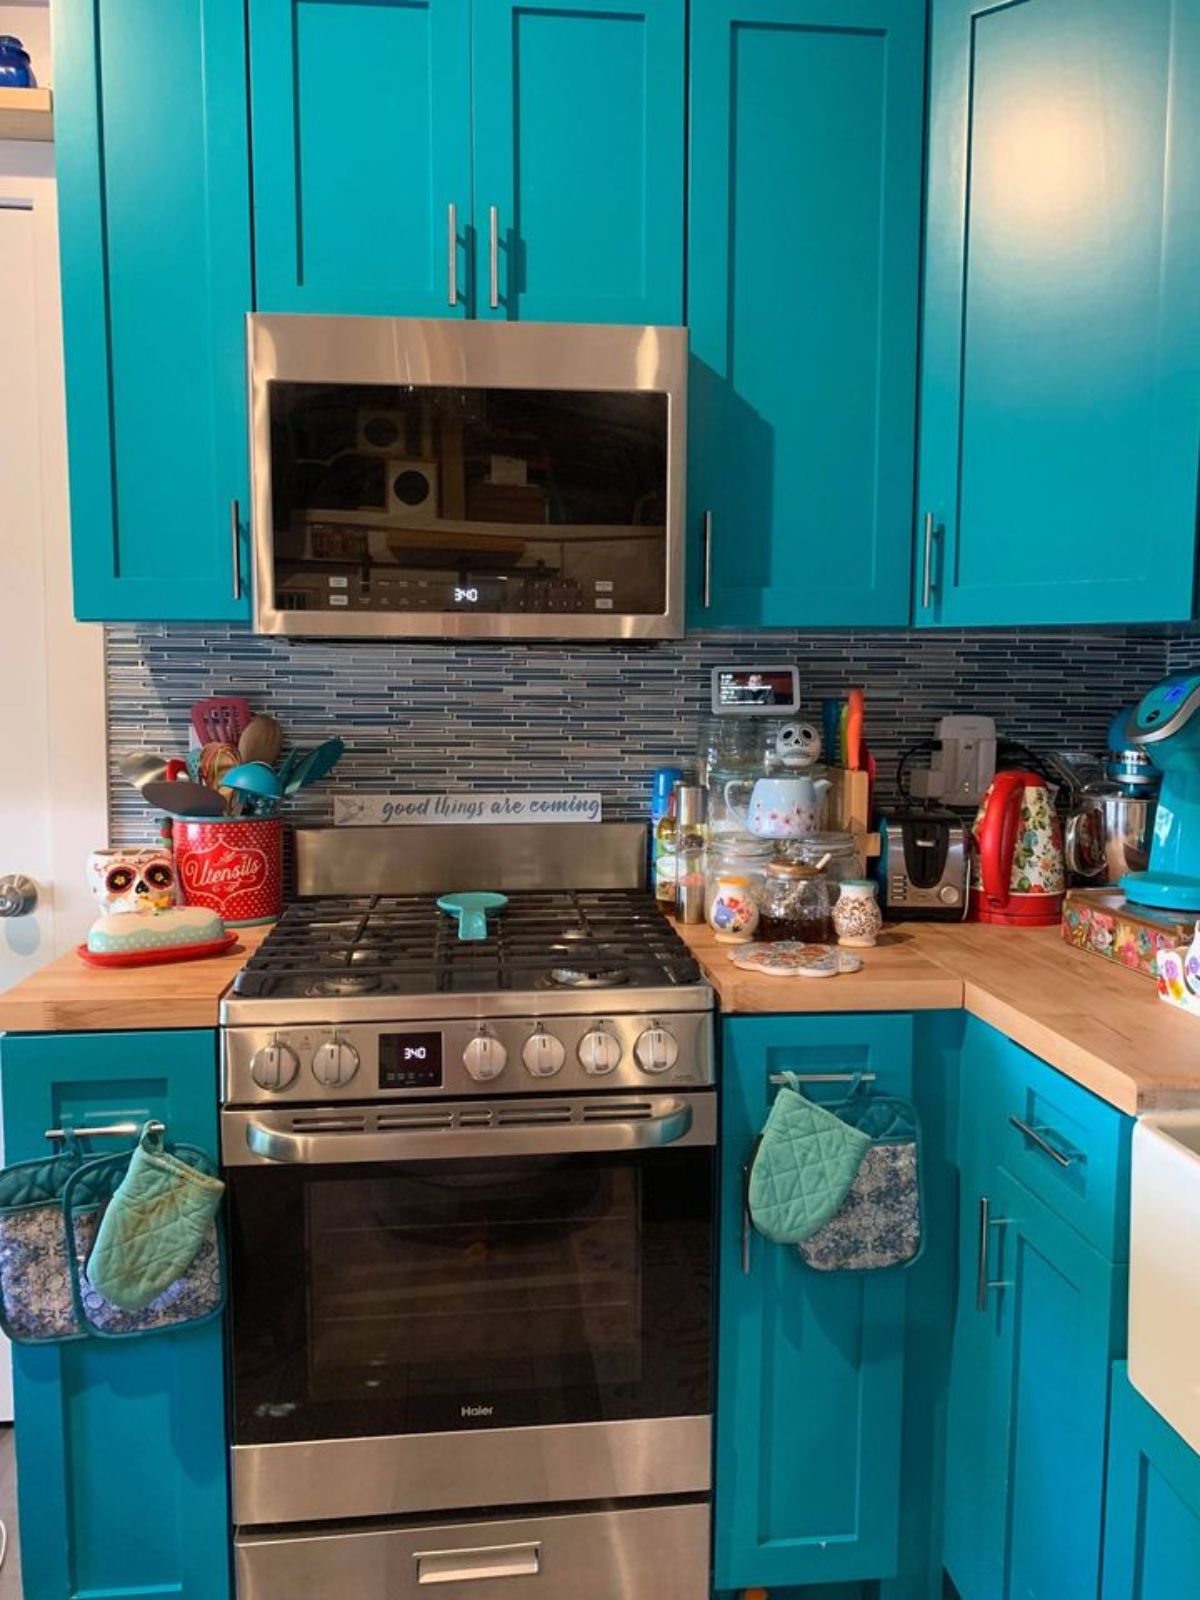 Kitchen is L shaped and it have stovetop cum oven and other equipments